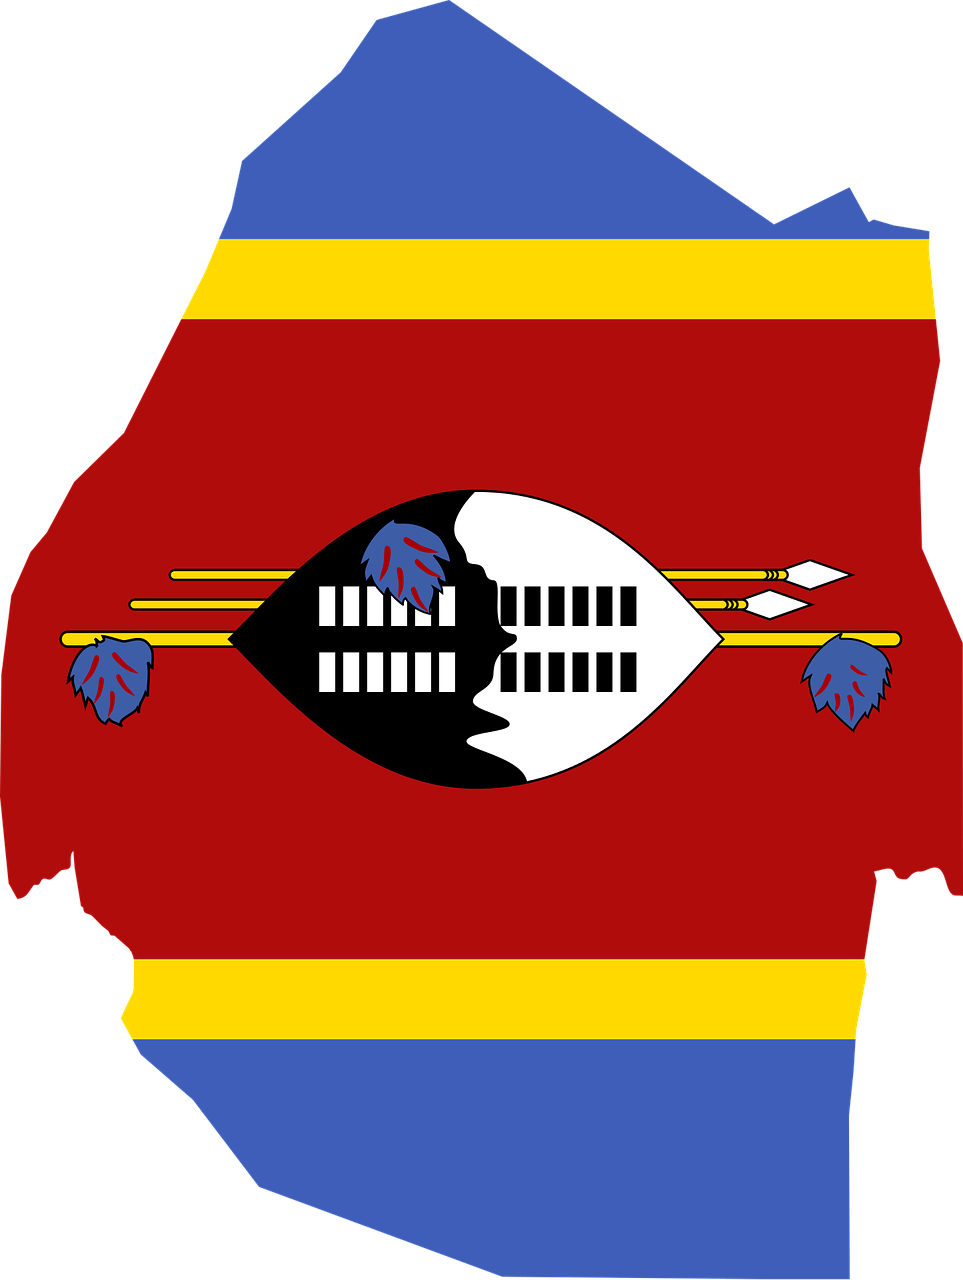 swaziland-g7905102ac_1280.png